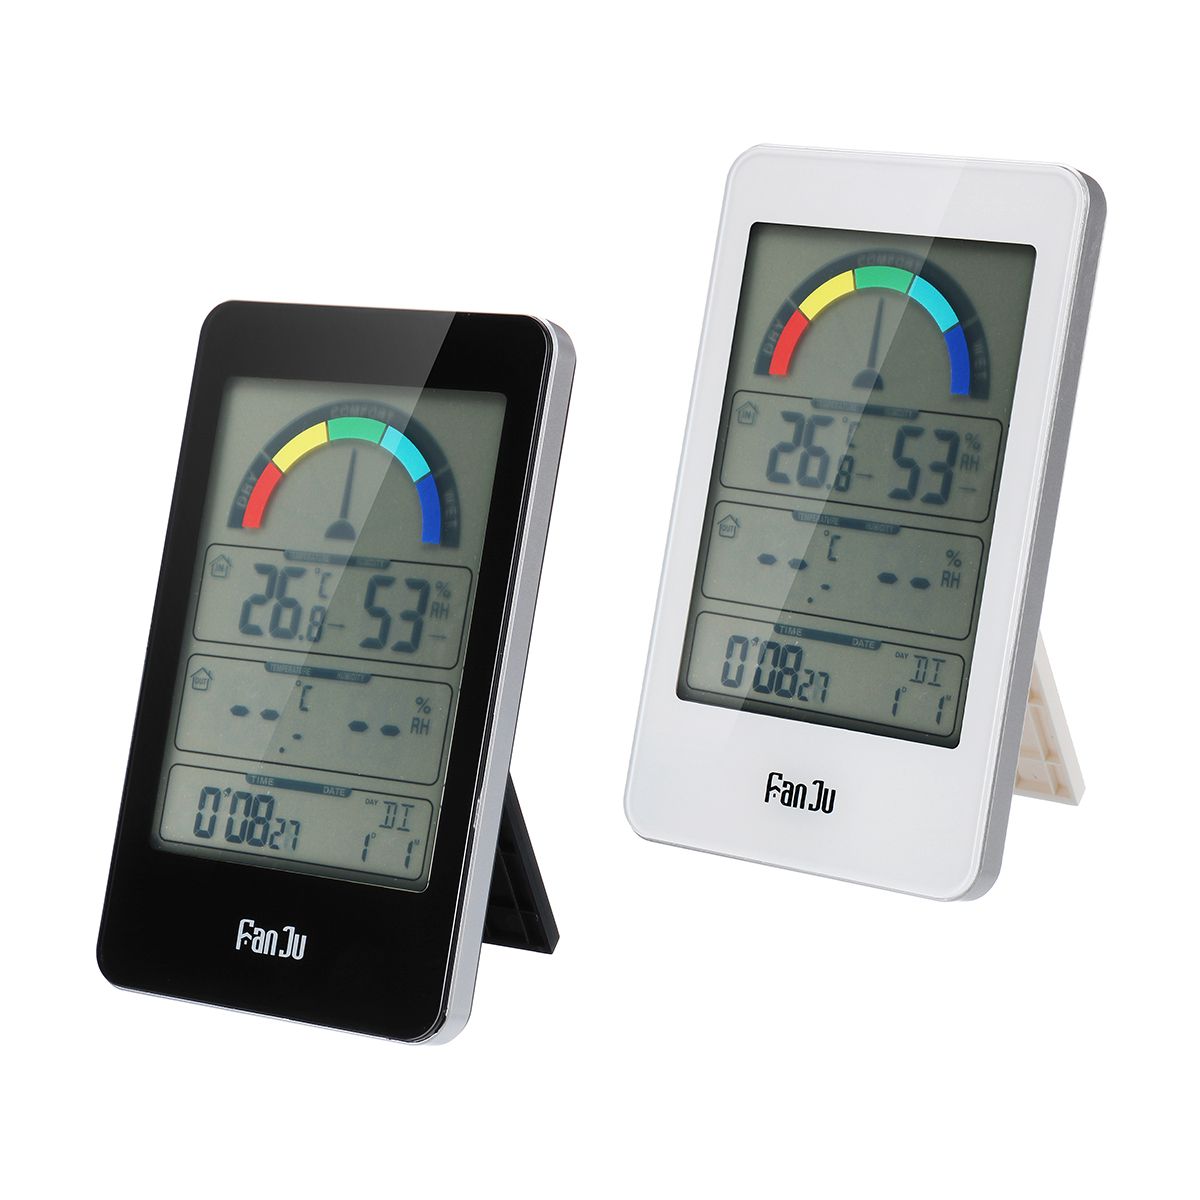 Digital-Indoor-and-Outdoor-Thermometer-Comfort-Indicator-Hygrometer-Temperature-Trend-Electronic-Ala-1509150